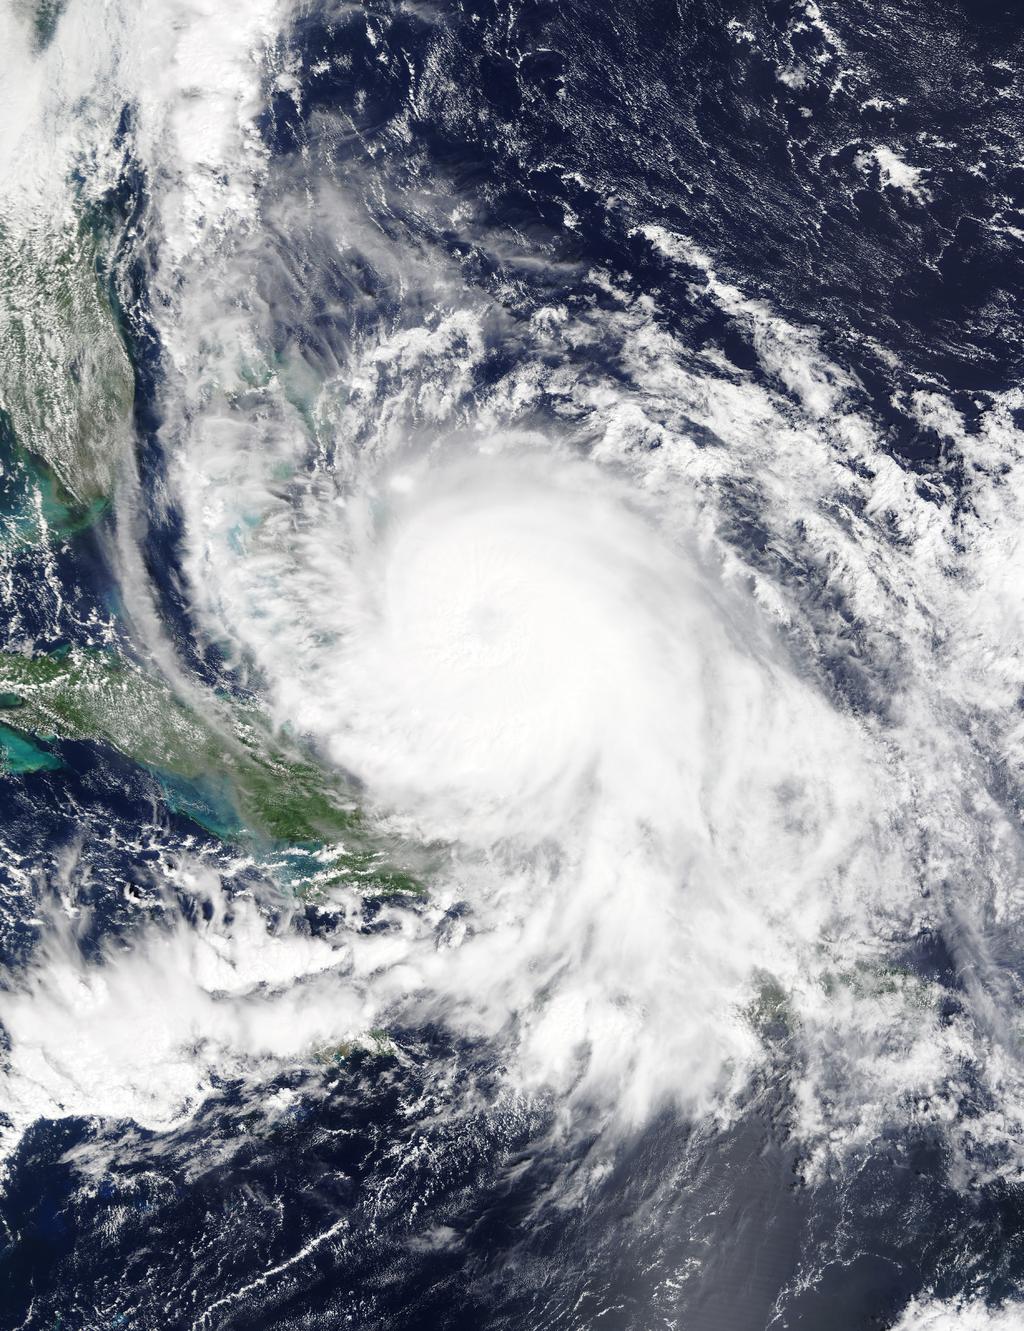 The AIR Tropical Cyclone Model for the Carribean In October 212, Hurricane Sandy wreaked havoc across Jamaica, Cuba, and the Bahamas.